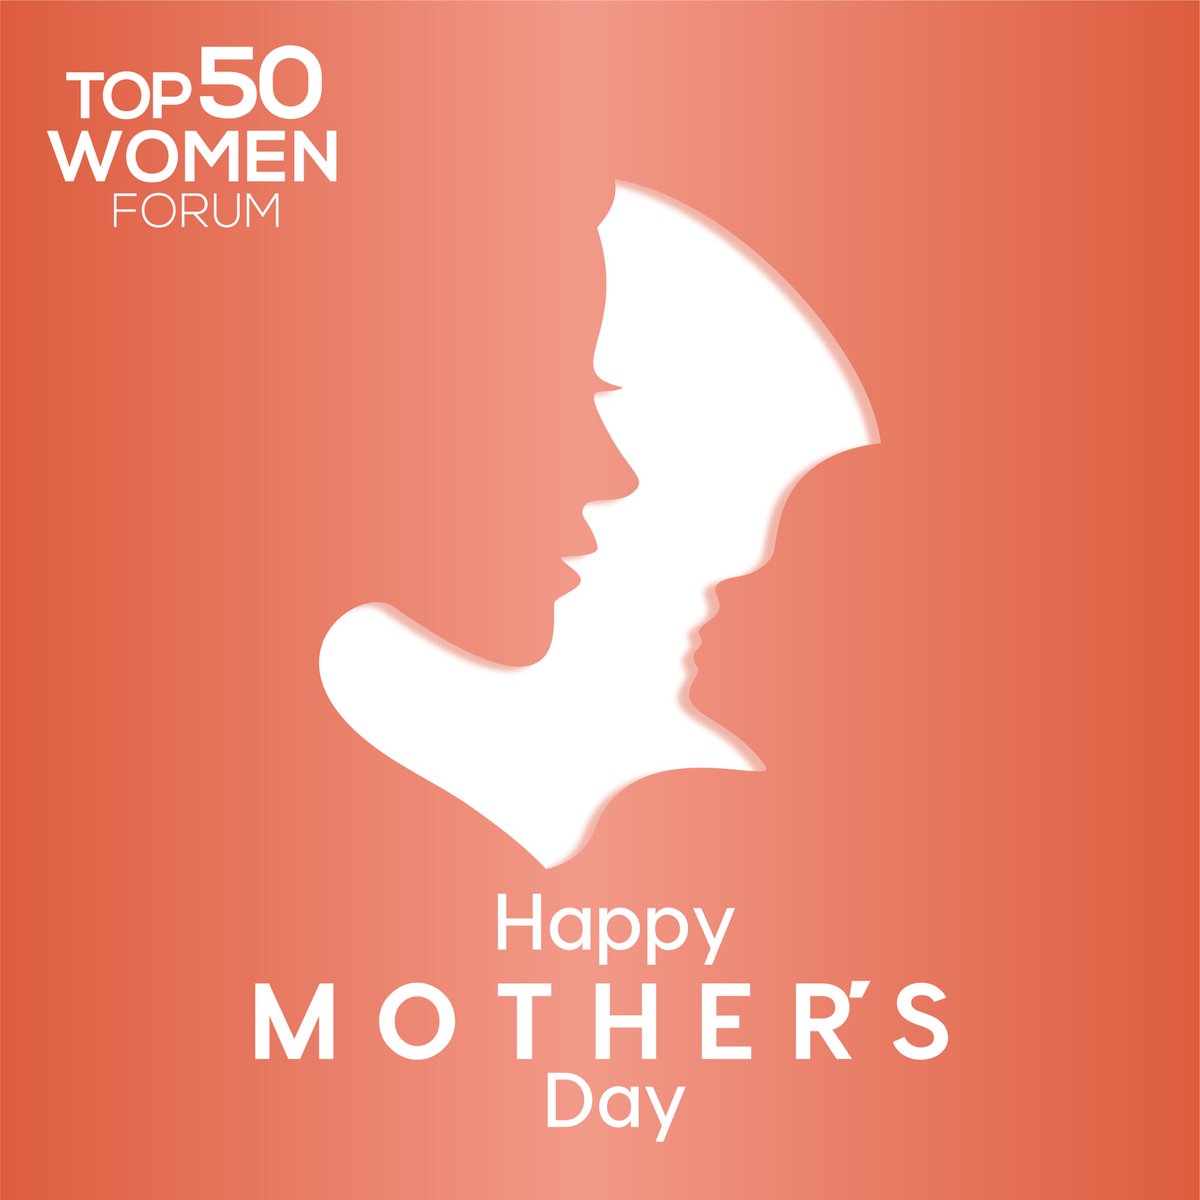 This #MothersDay, we celebrate the amazing women on the Top 50 Women Forum platform who are not only leaders in their fields but also incredible mothers. We’re also celebrating the strength of mothers around the world who are suffering!

#Top50WomenForum #Top50